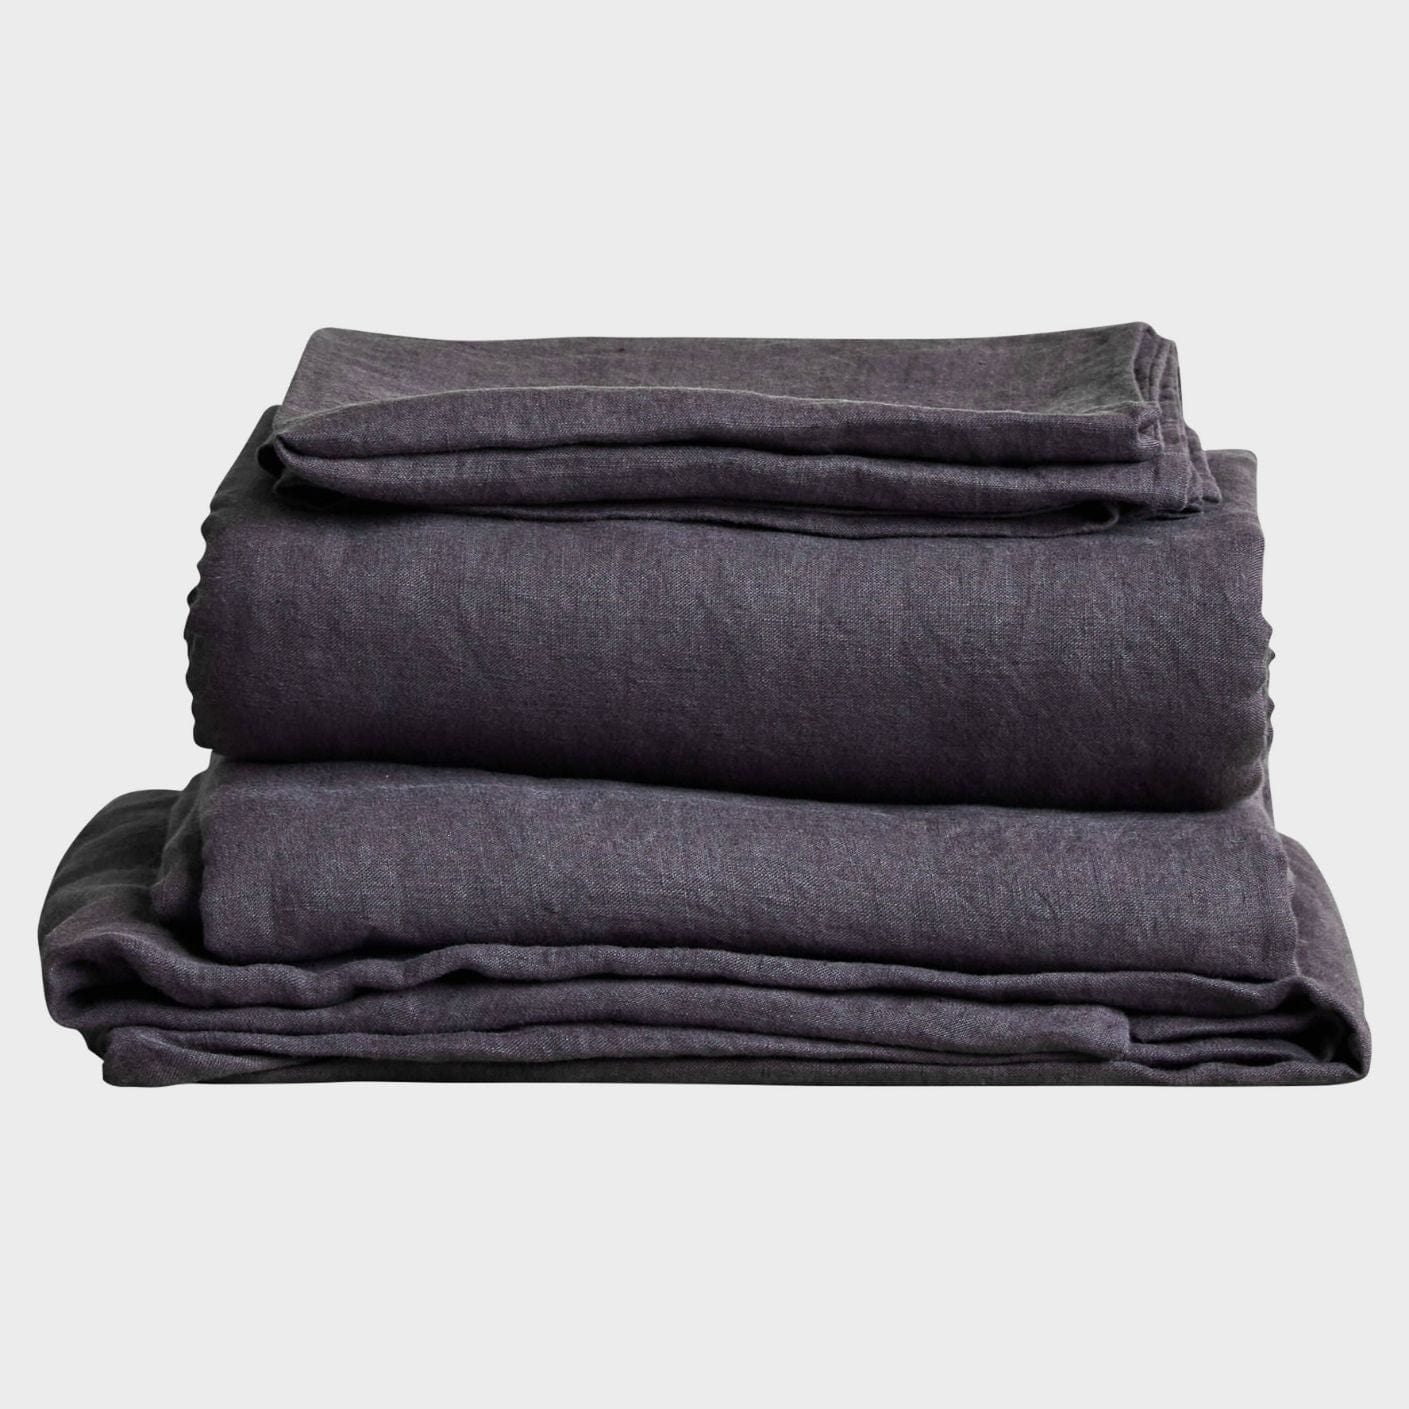 Charcoal Stonewashed Linen Bed Set